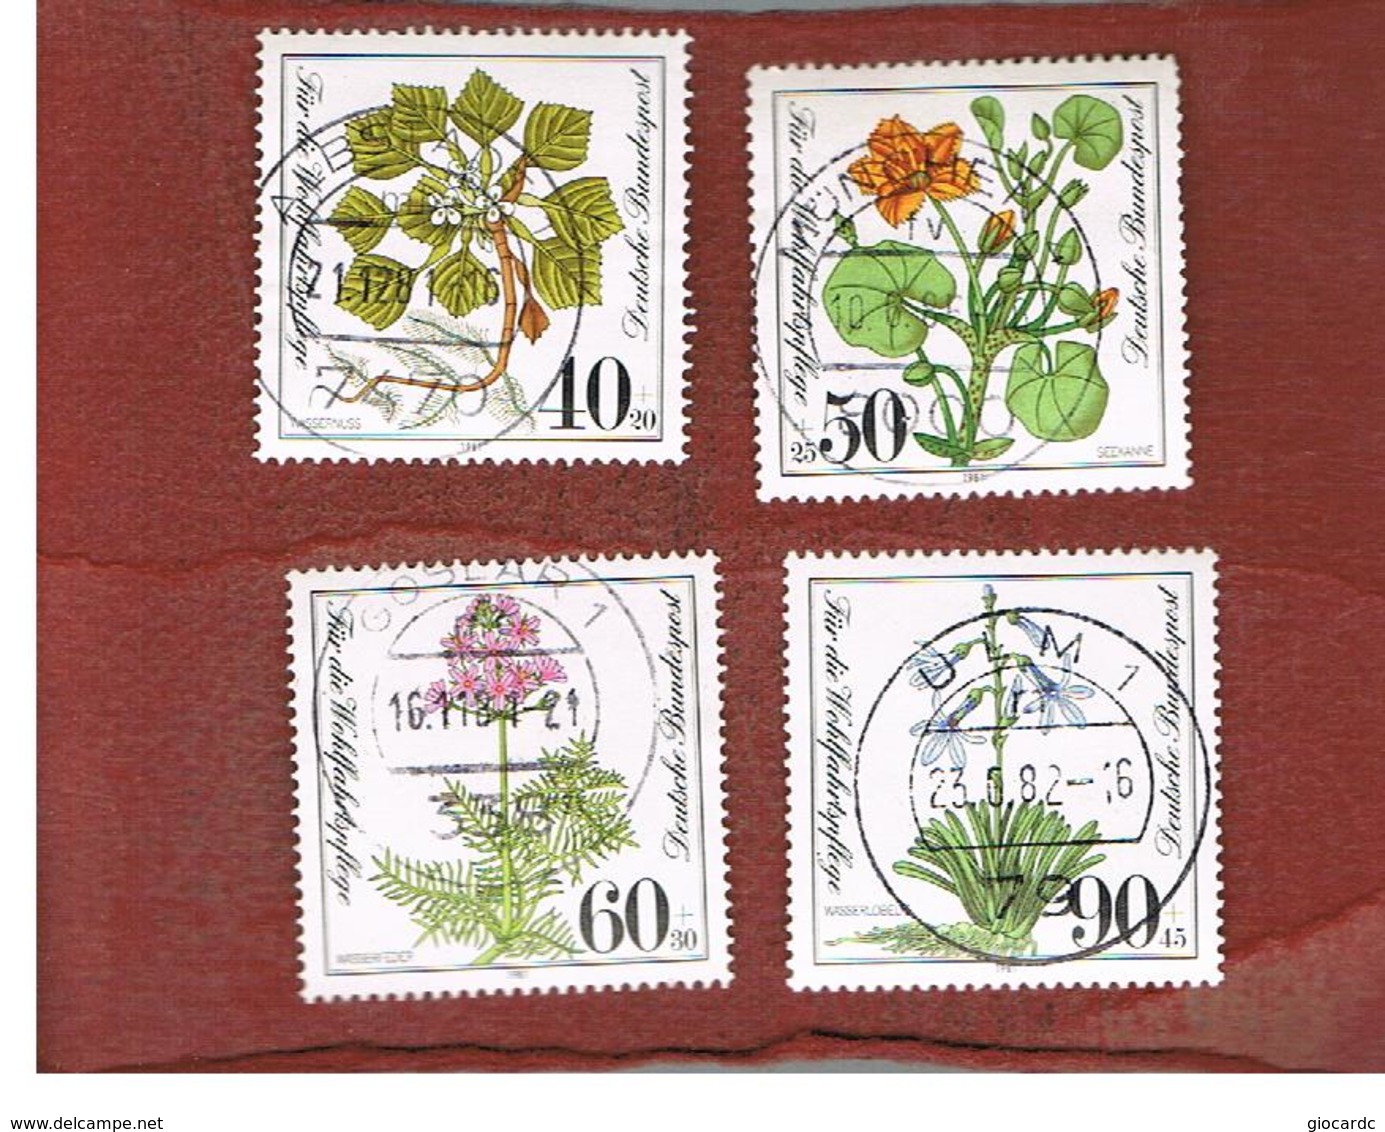 GERMANIA (GERMANY) - SG 1969.1971 - 1981 HUMANITARIAN RELIEF FUND: WILDFLOWERS (COMPLET SET OF 4)  USED - Oblitérés